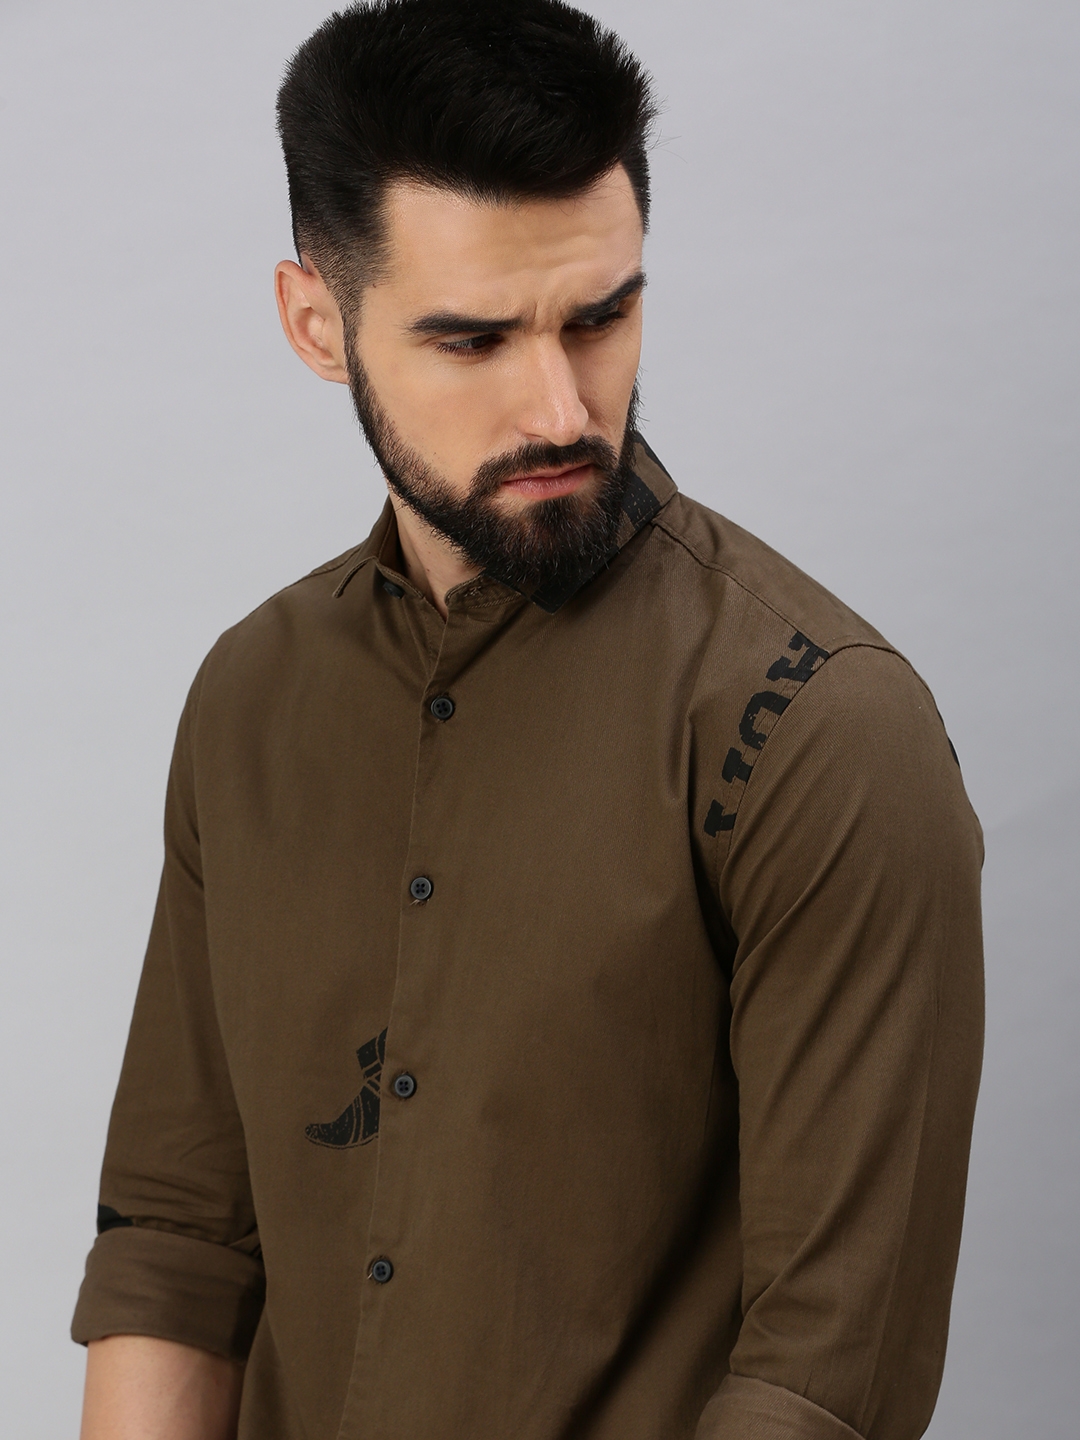 Showoff | SHOWOFF Men Coffee Brown Printed Spread Collar Full Sleeves Casual Shirt 0